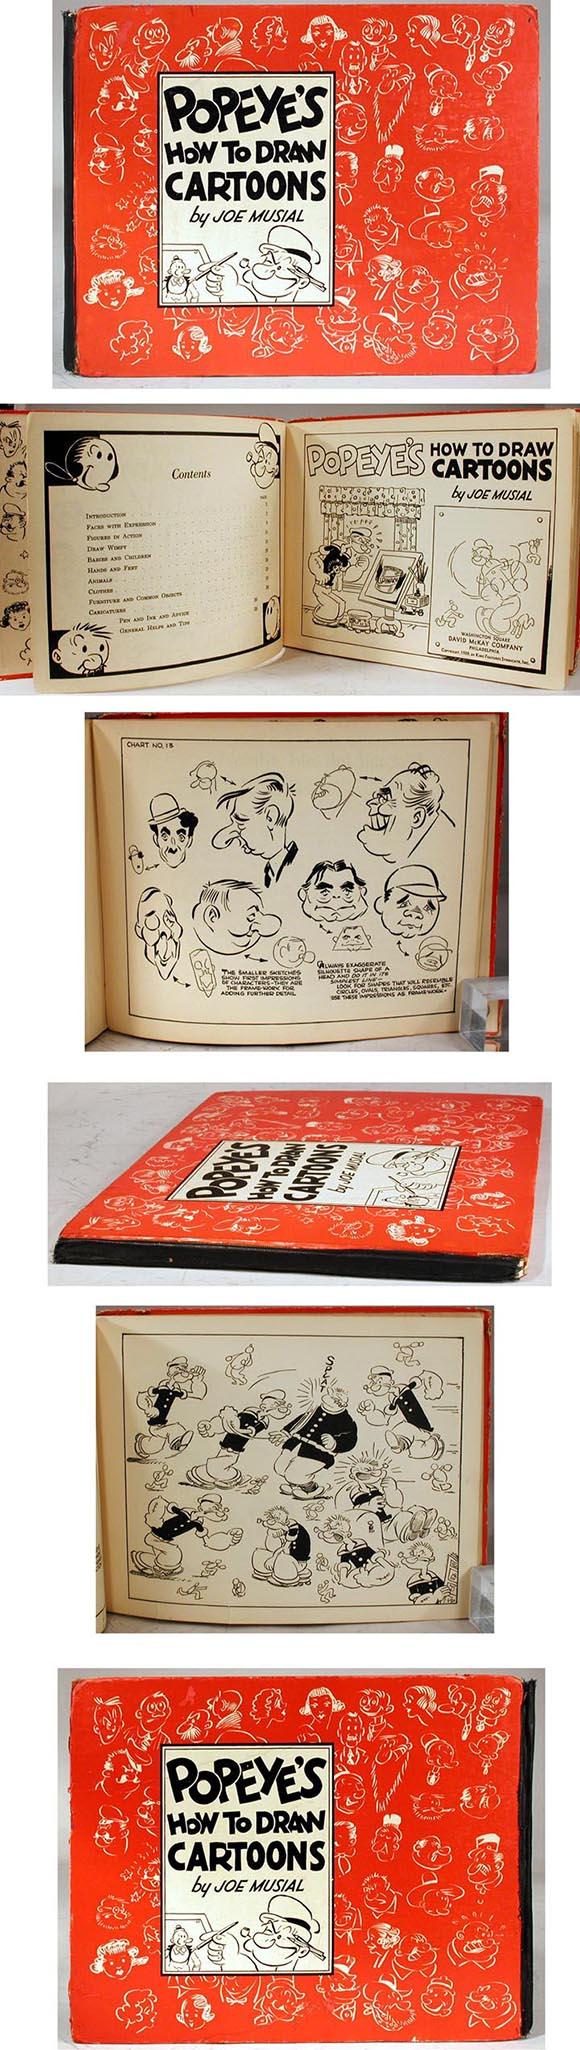 1939 Popeye's How to Draw Cartoons by Joe Musial